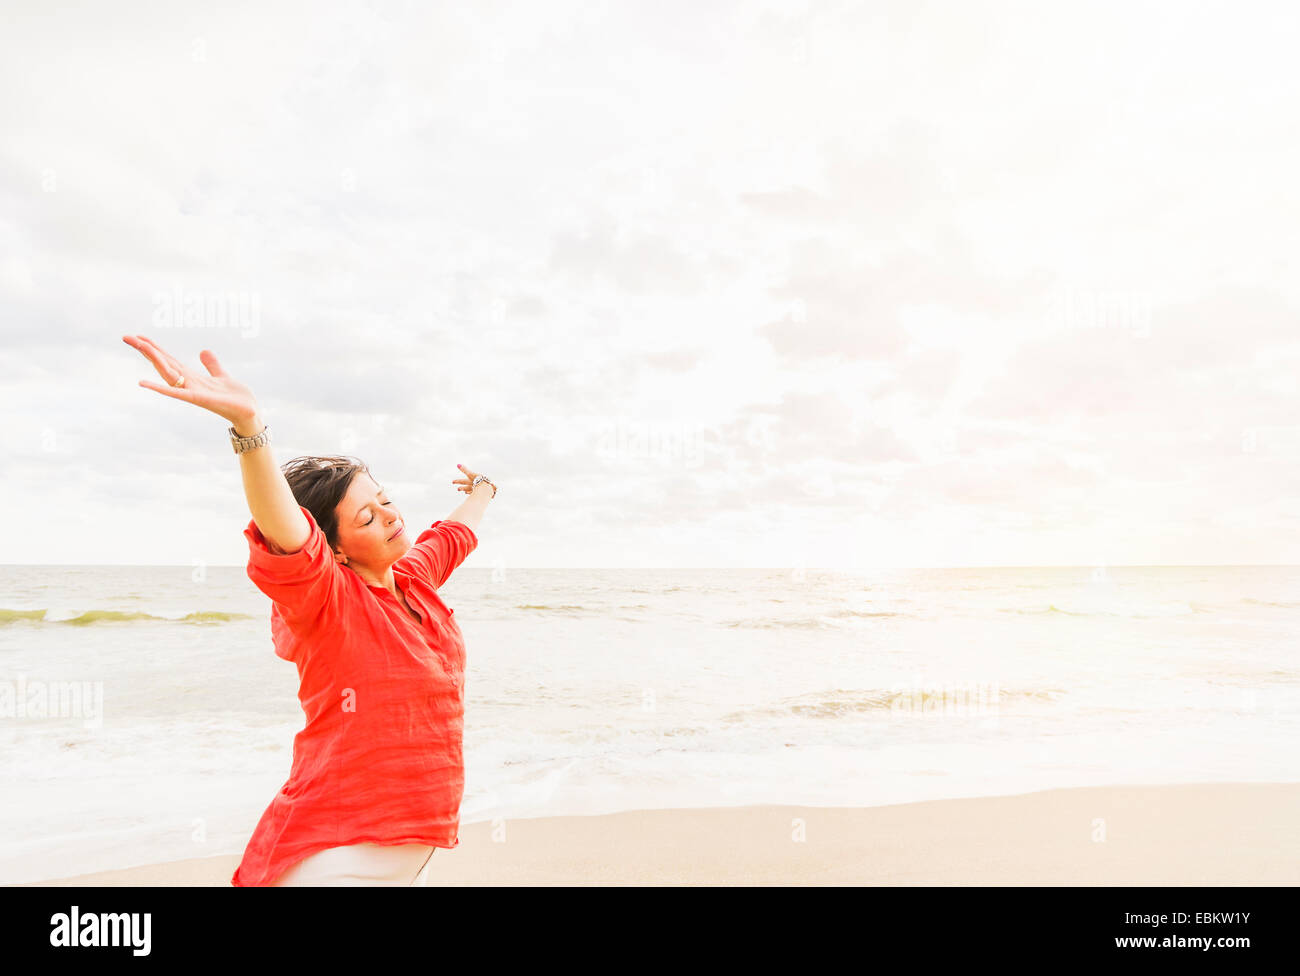 USA, Florida, Jupiter, Side view of woman standing with arms up on beach Stock Photo